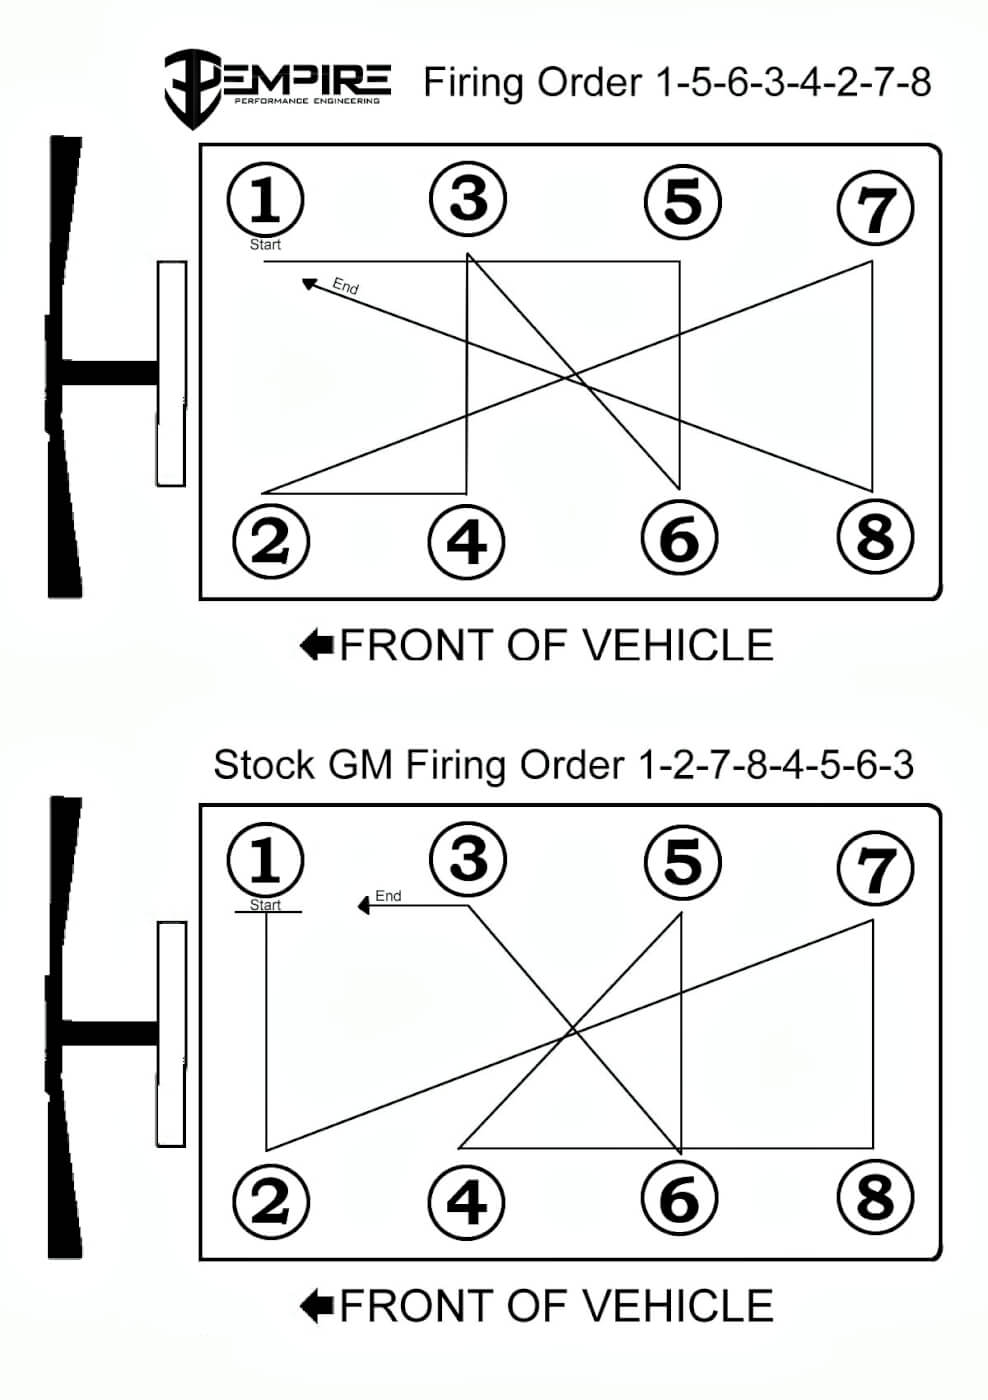 This illustration shows the difference between the factory GM firing order (bottom) and the new firing order of the Alternated Firing Camshaft developed by Empire Diesel. The GM Duramax has had troubles with crankshaft failures in high-horsepower applications, with the snout breaking off due to extreme stress load. The altered firing order helps to more evenly distribute those stresses across the entire length of the crankshaft, improving engine harmonics and durability.